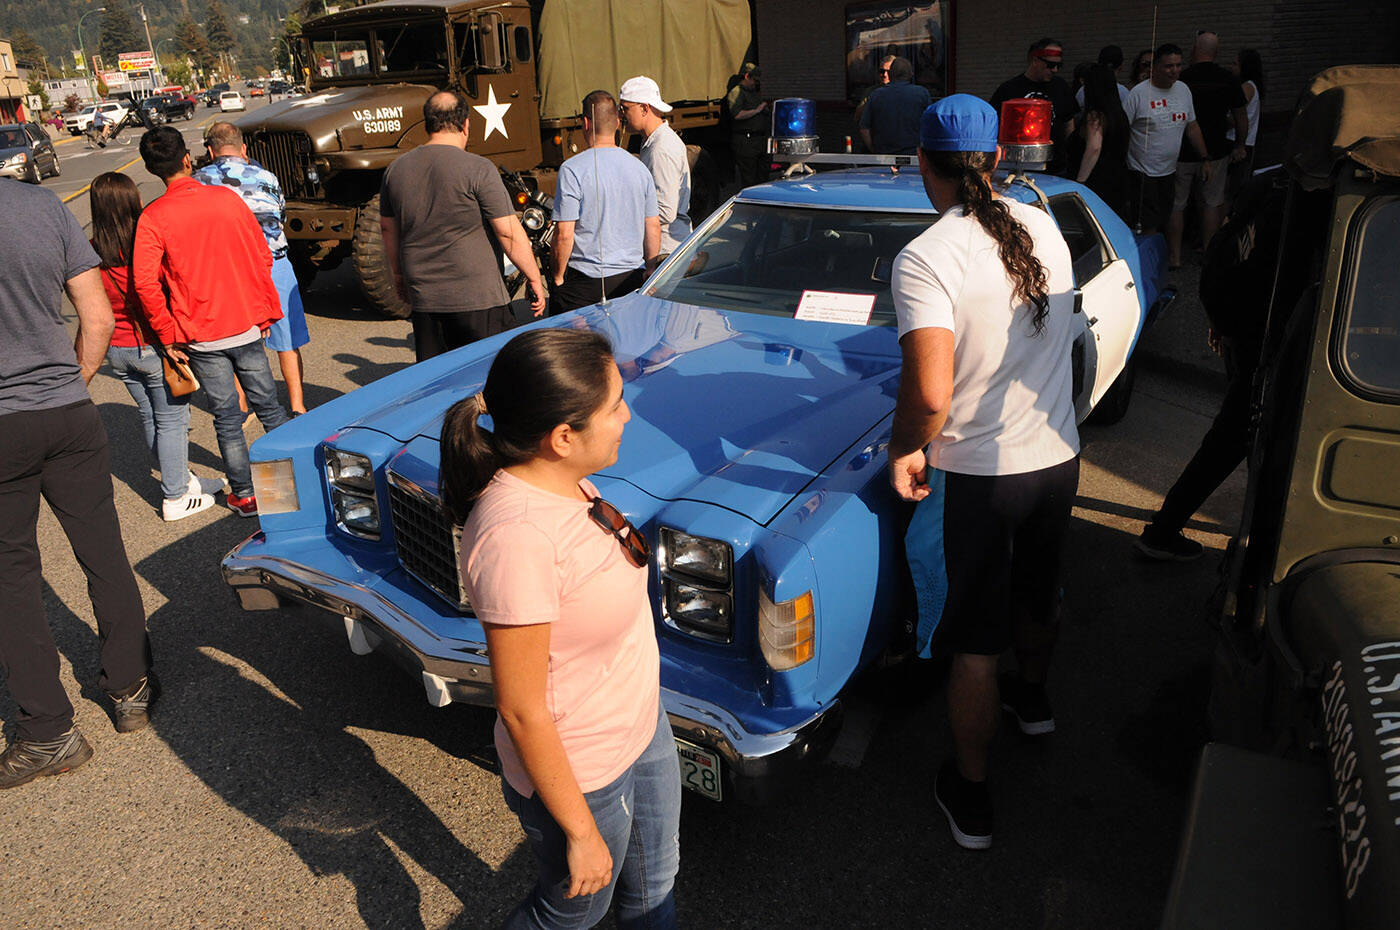 Fans check out some of the vehicles on display during the Rambo First Blood 40th Anniversary celebrations in Hope on Saturday, Oct. 8, 2022. (Jenna Hauck/ Black Press Media)